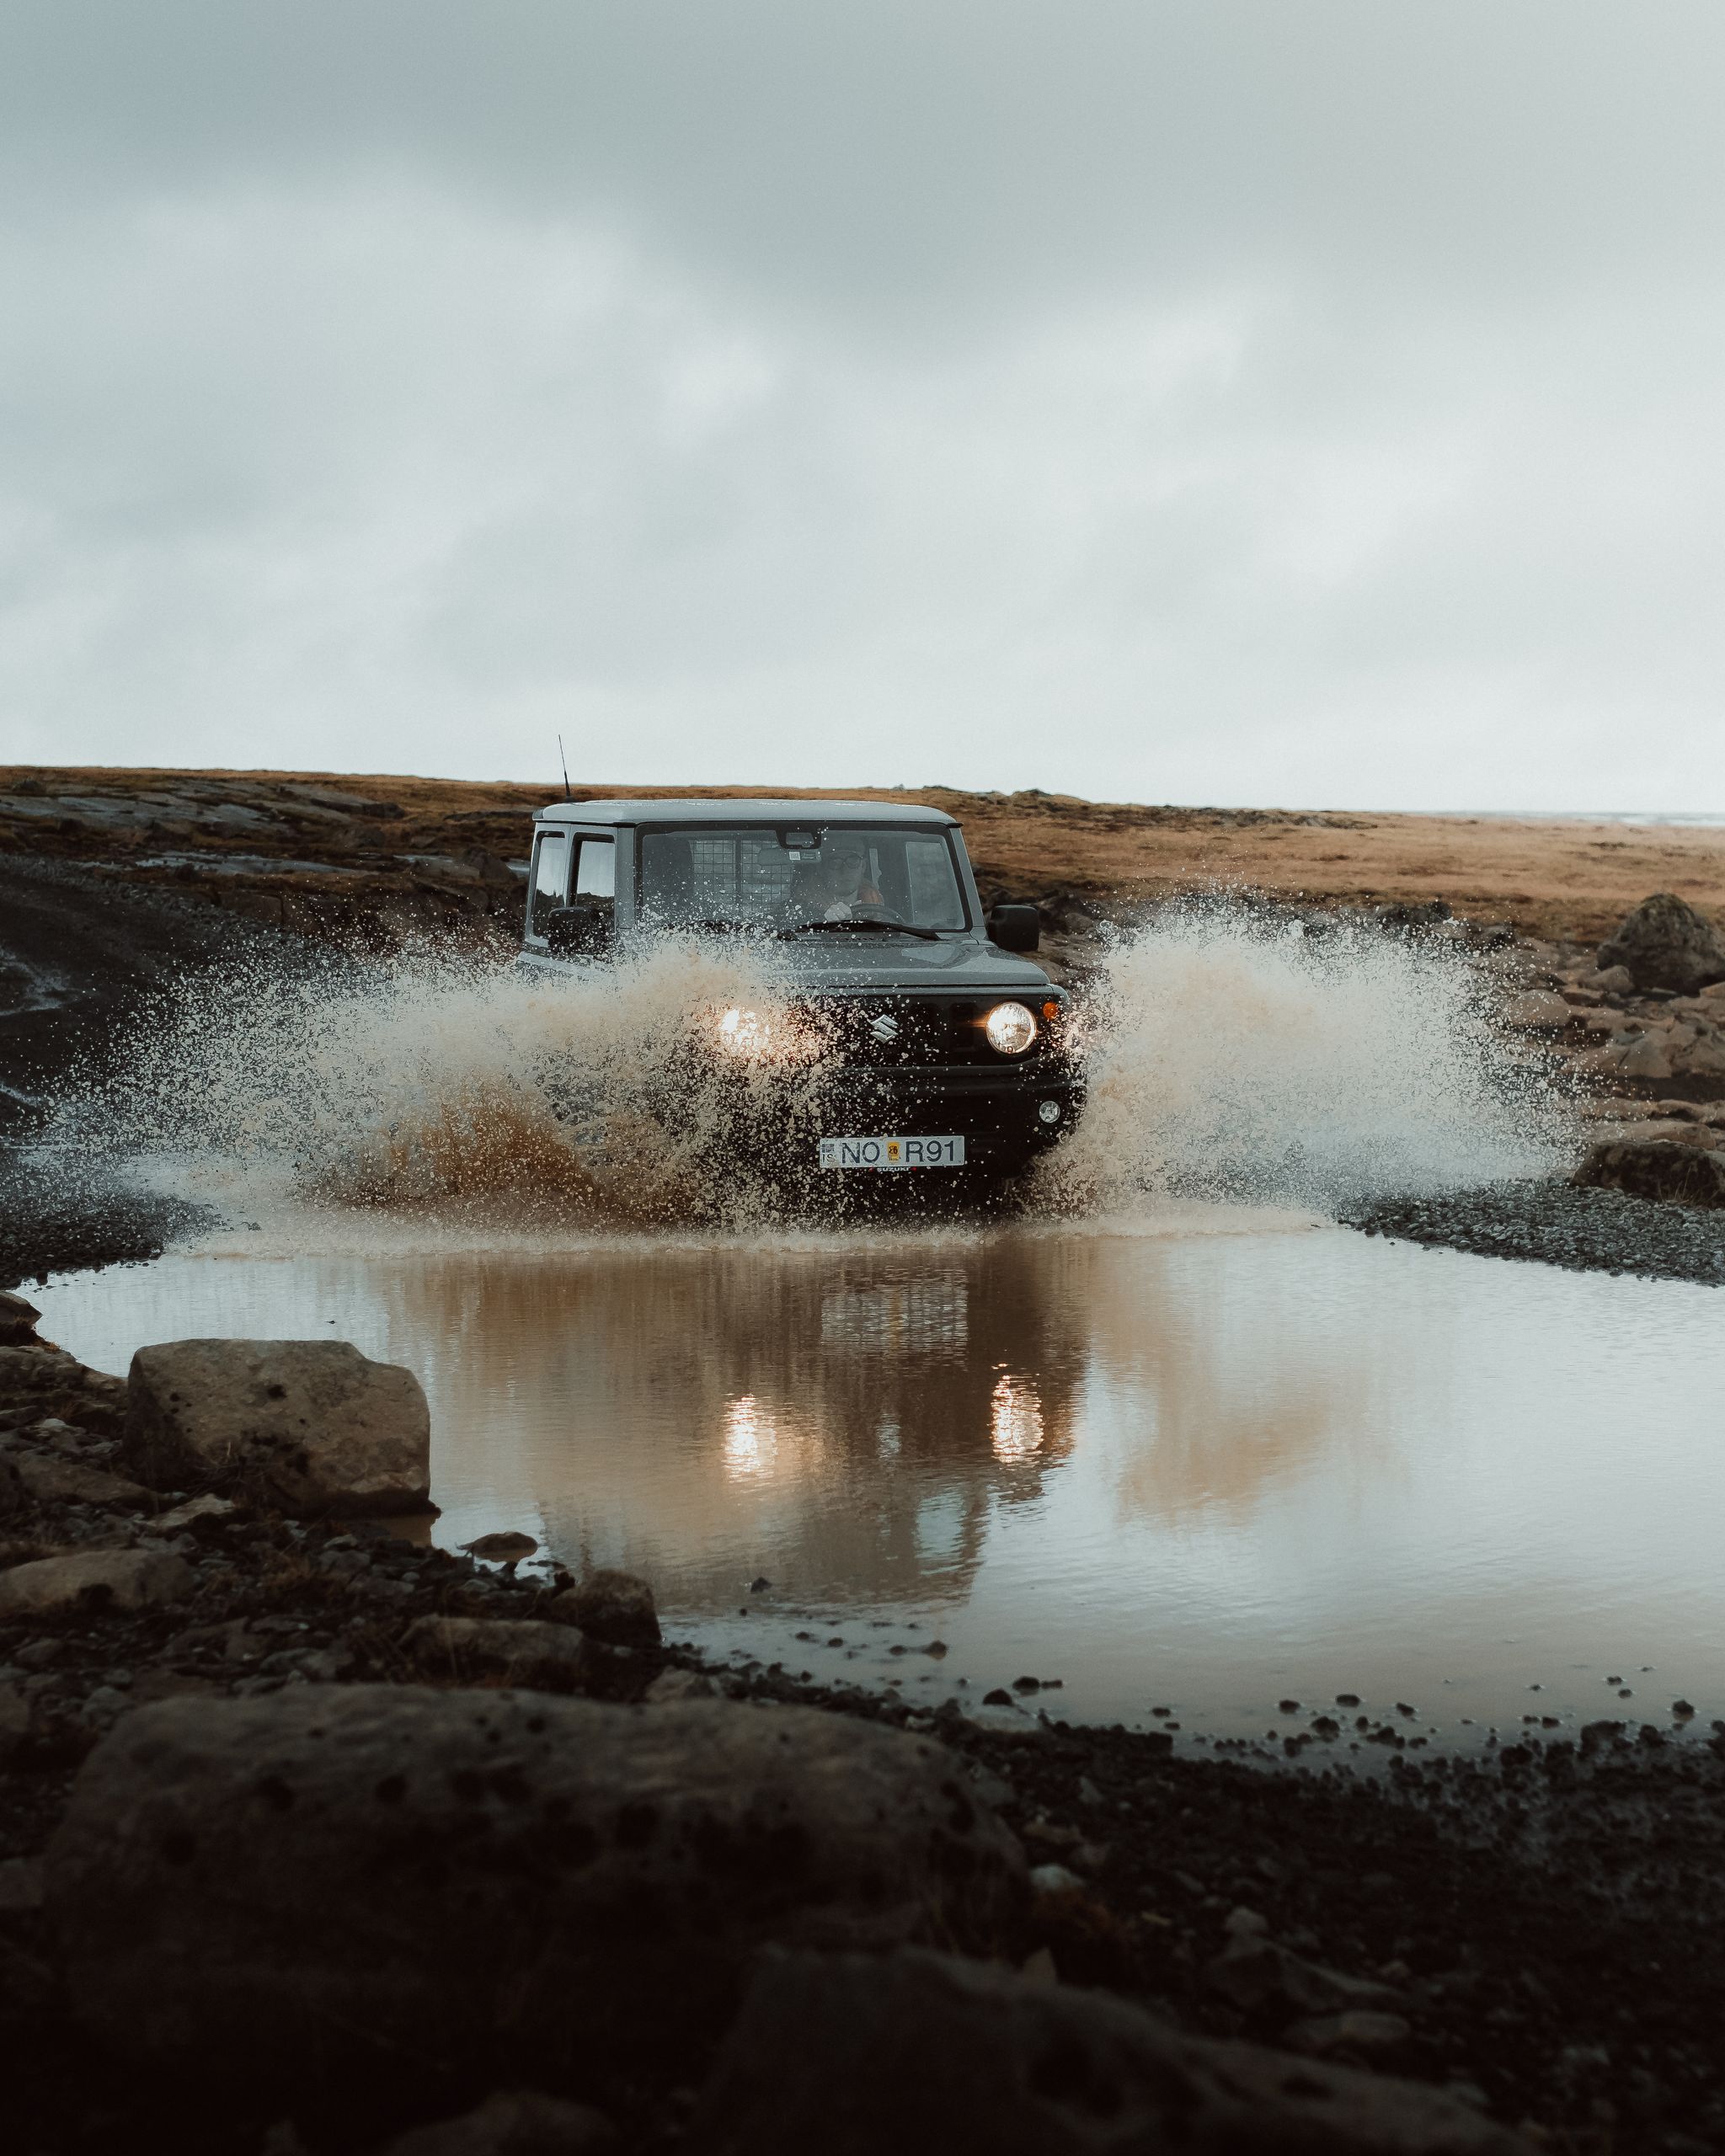 A Suzuki Jimny 4x4 bravely crossing a rushing river in Iceland's rugged terrain